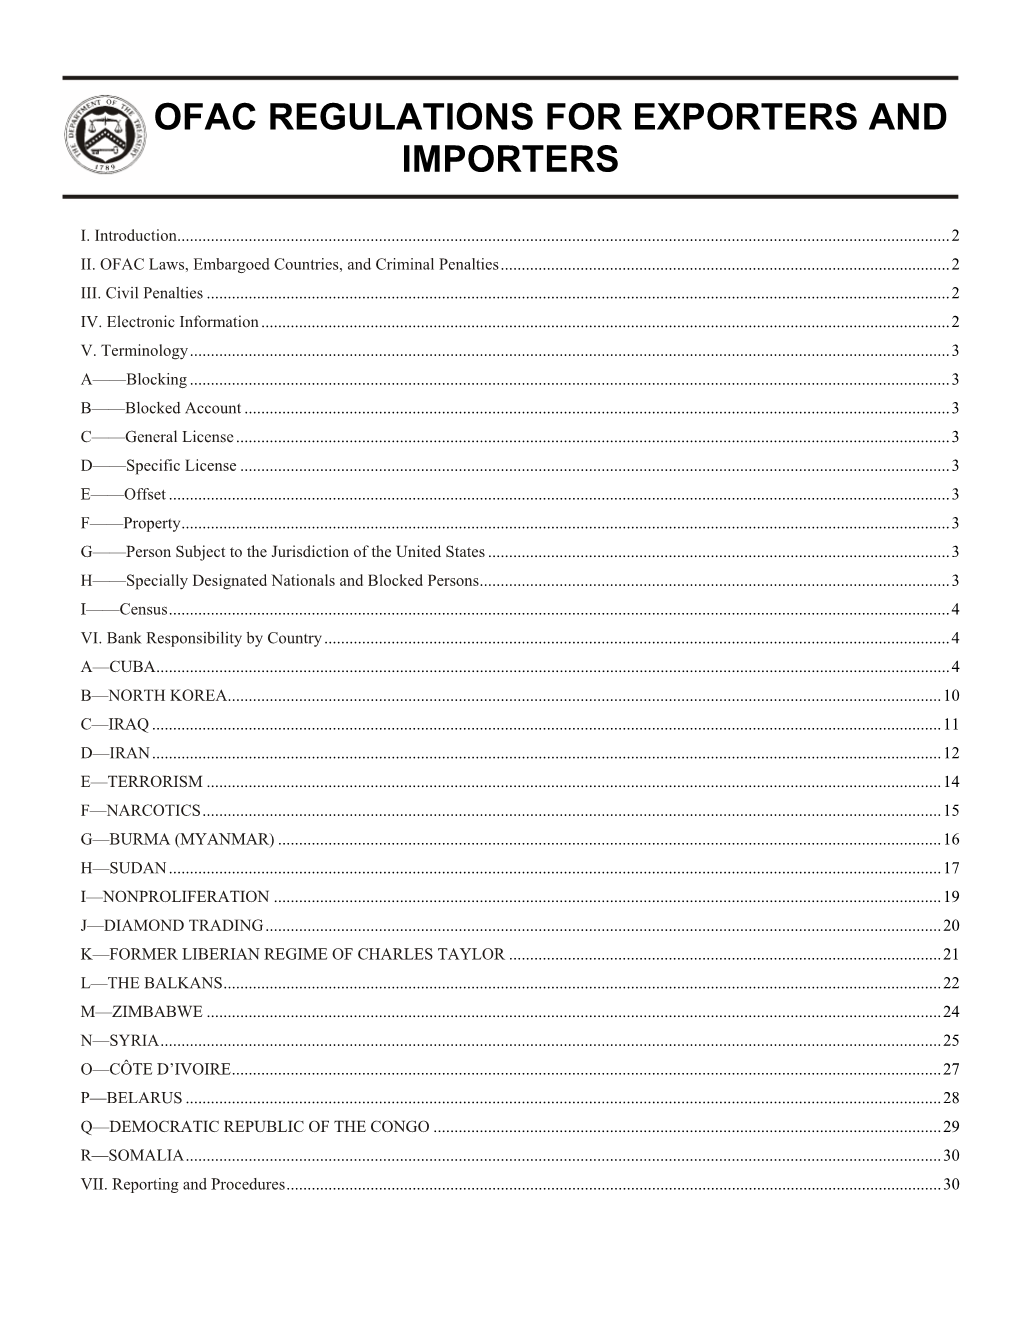 Ofac Regulations for Exporters and Importers